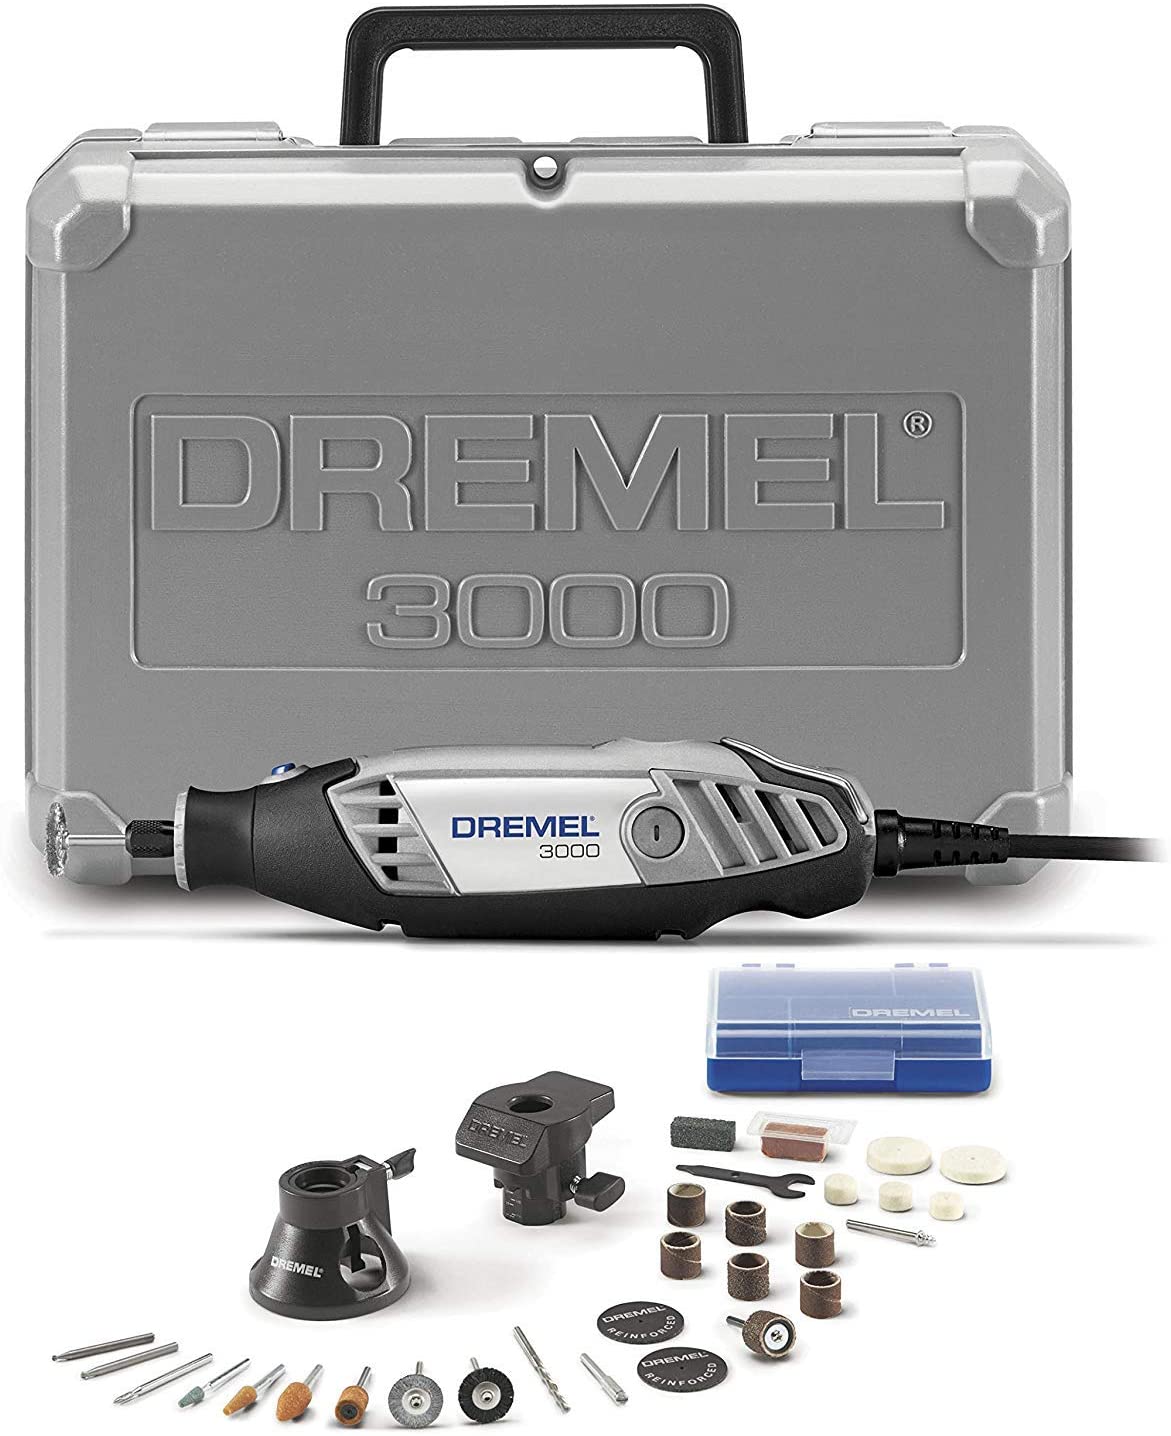 Dremel 3000-2/28 Variable Speed Rotary Tool Kit, 28-Pieces